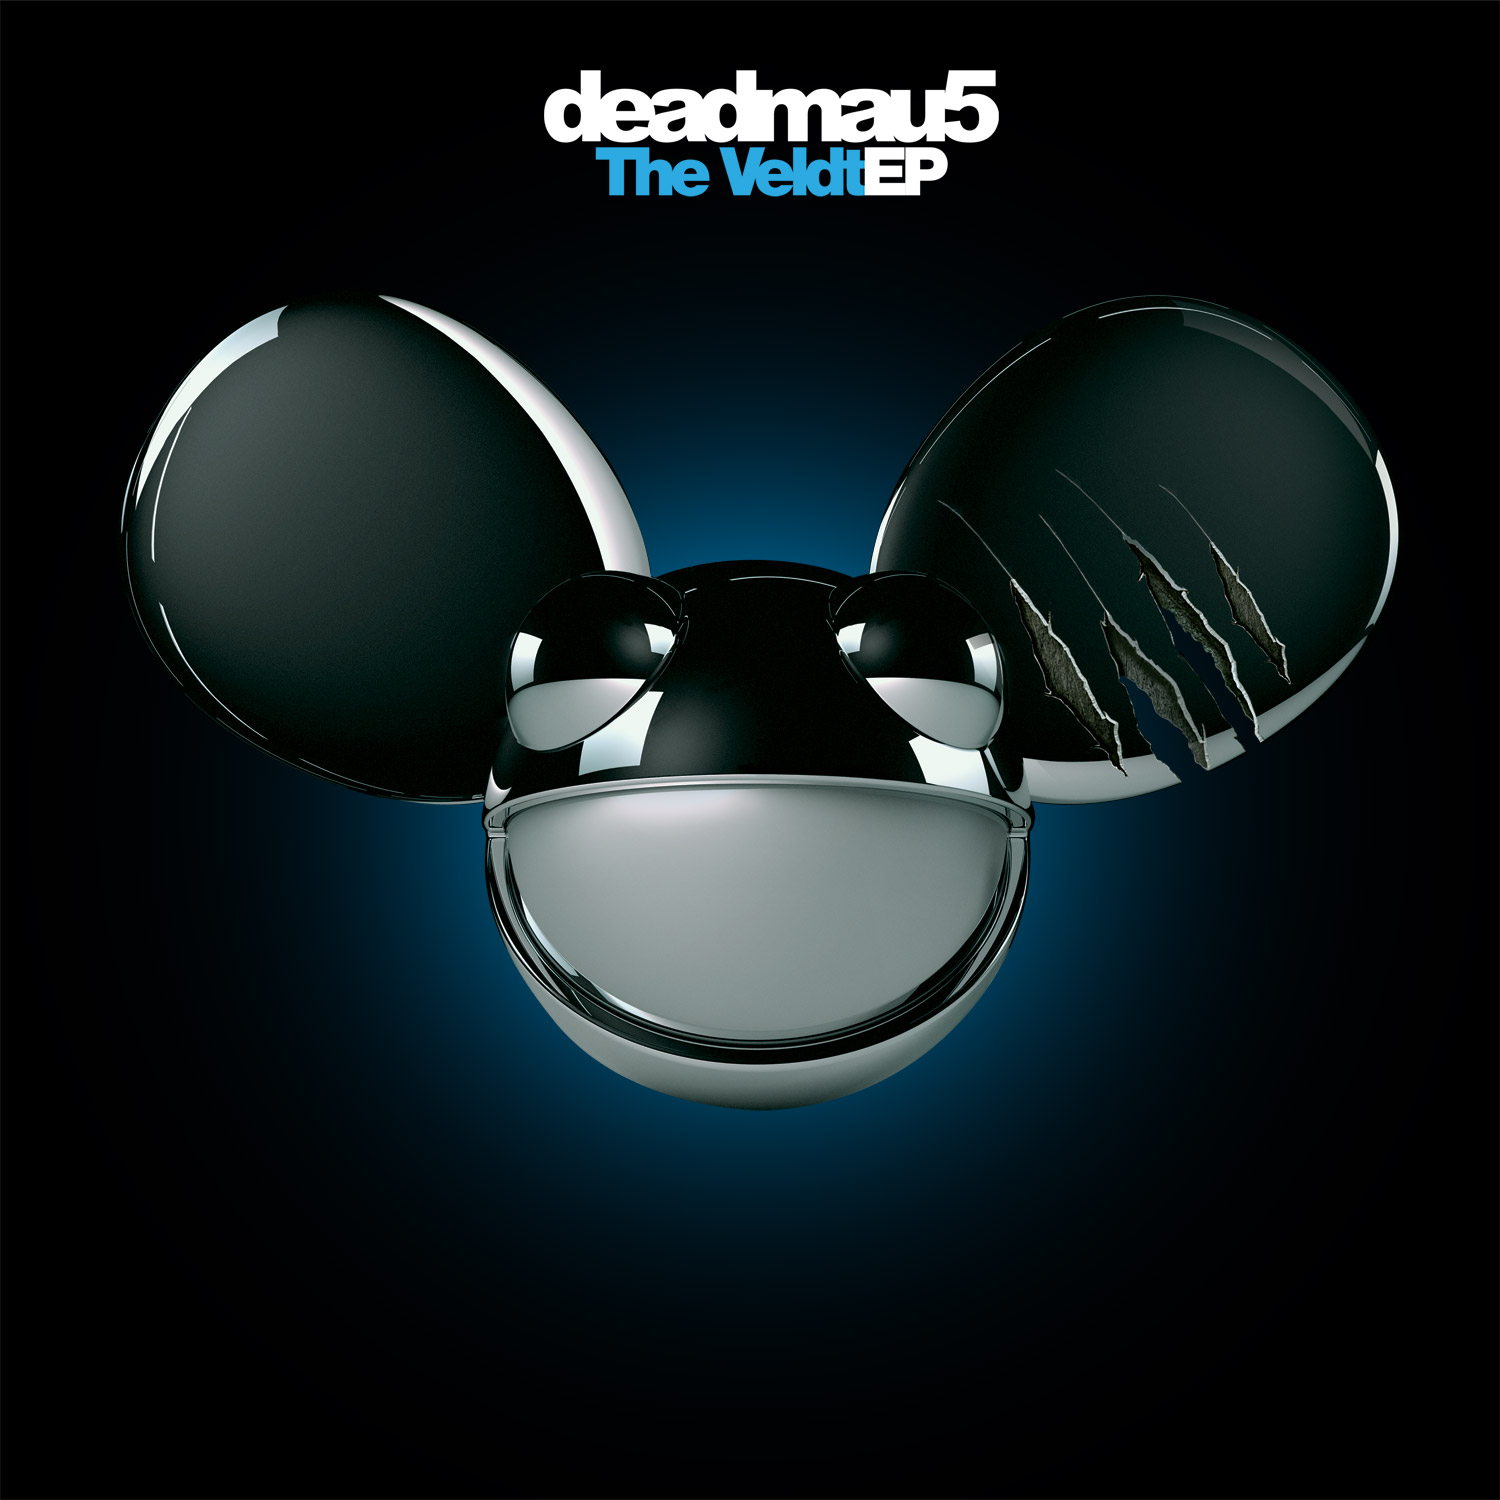 Deadmau5’s New EP “The Veldt EP” is Now Available